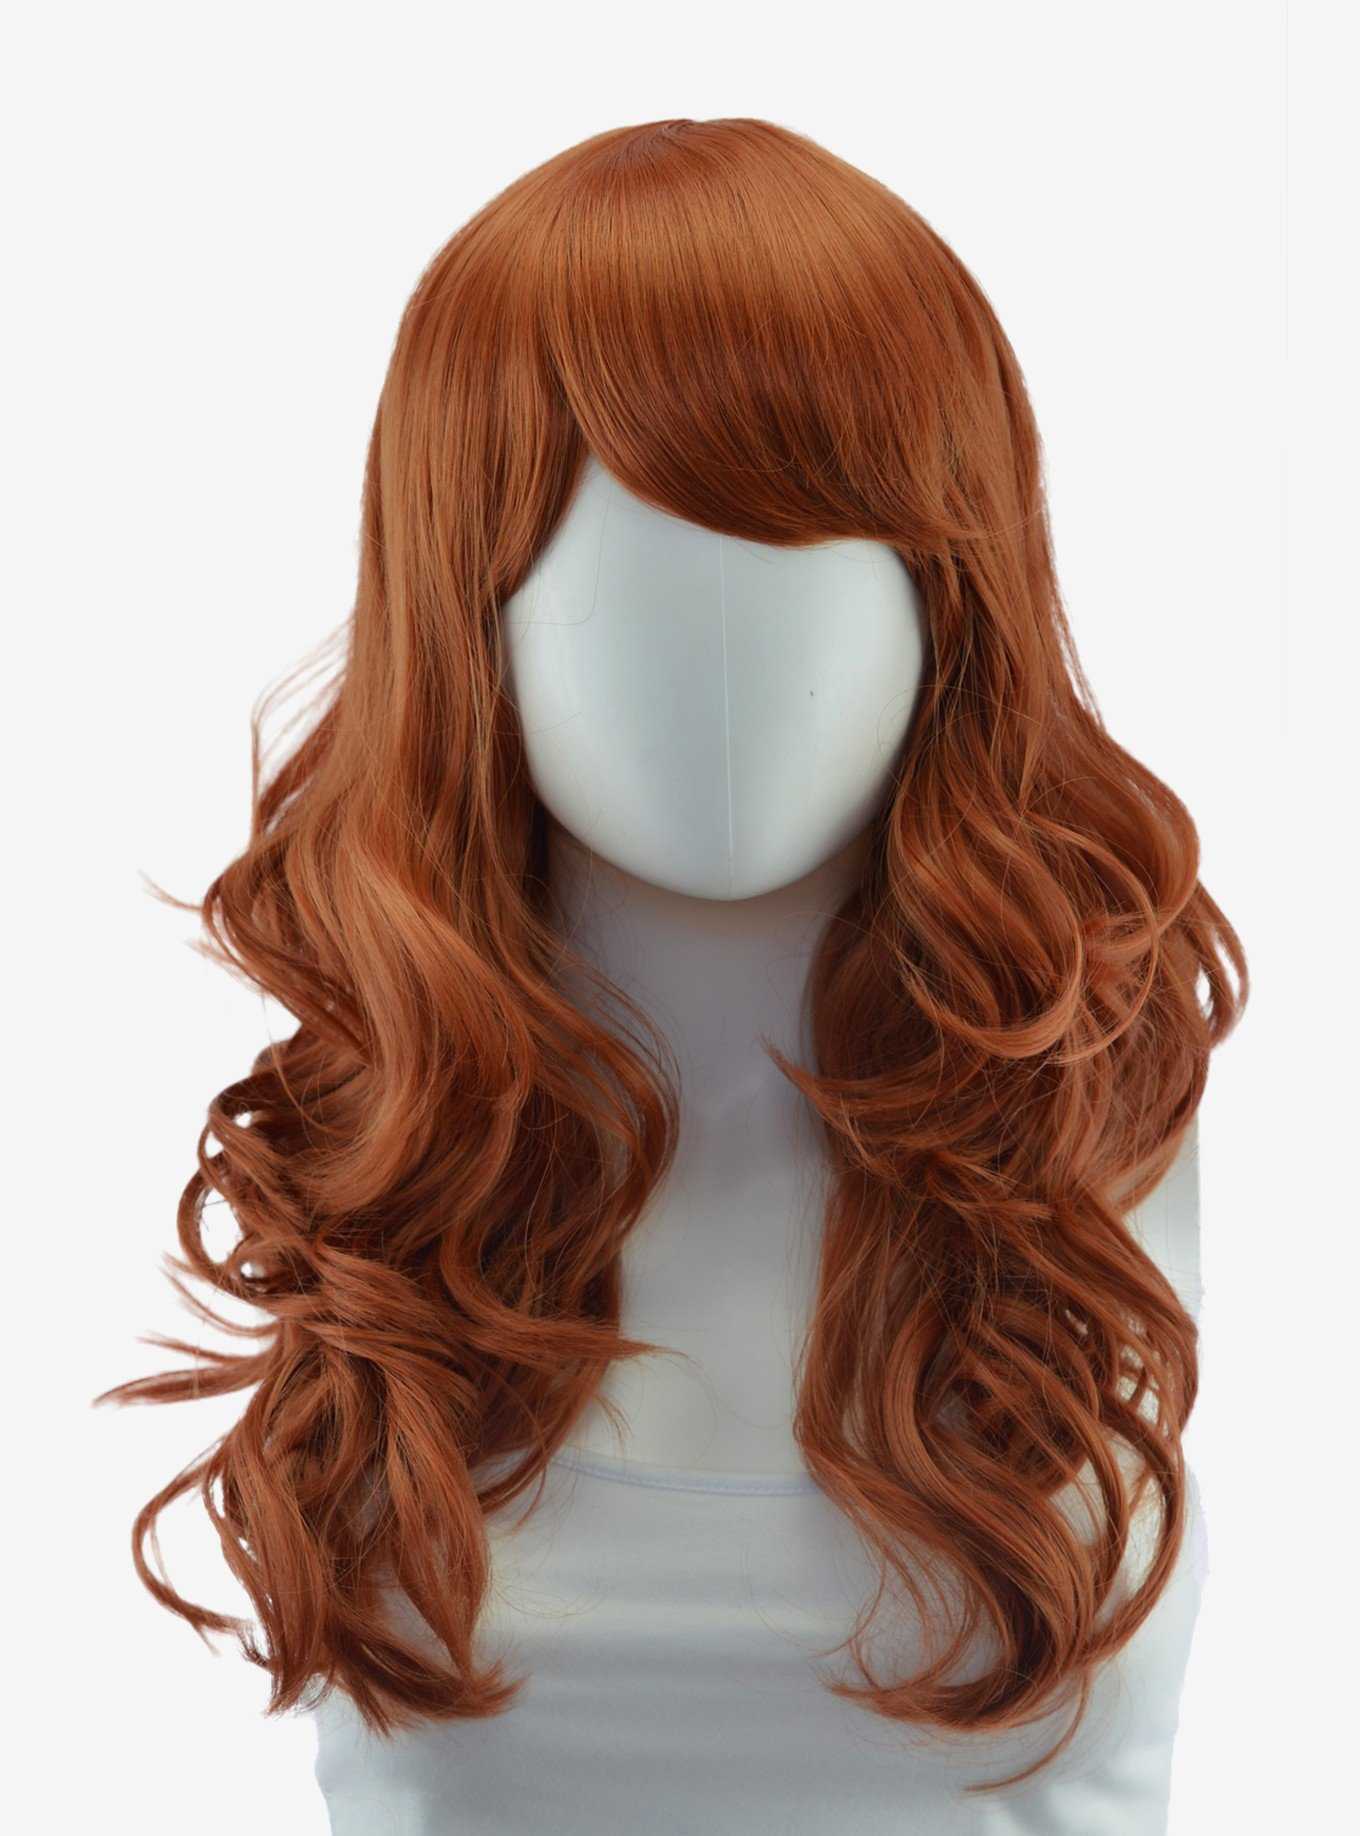 Epic Cosplay Hestia Cocoa Brown Shoulder Length Curly Wig, , hi-res